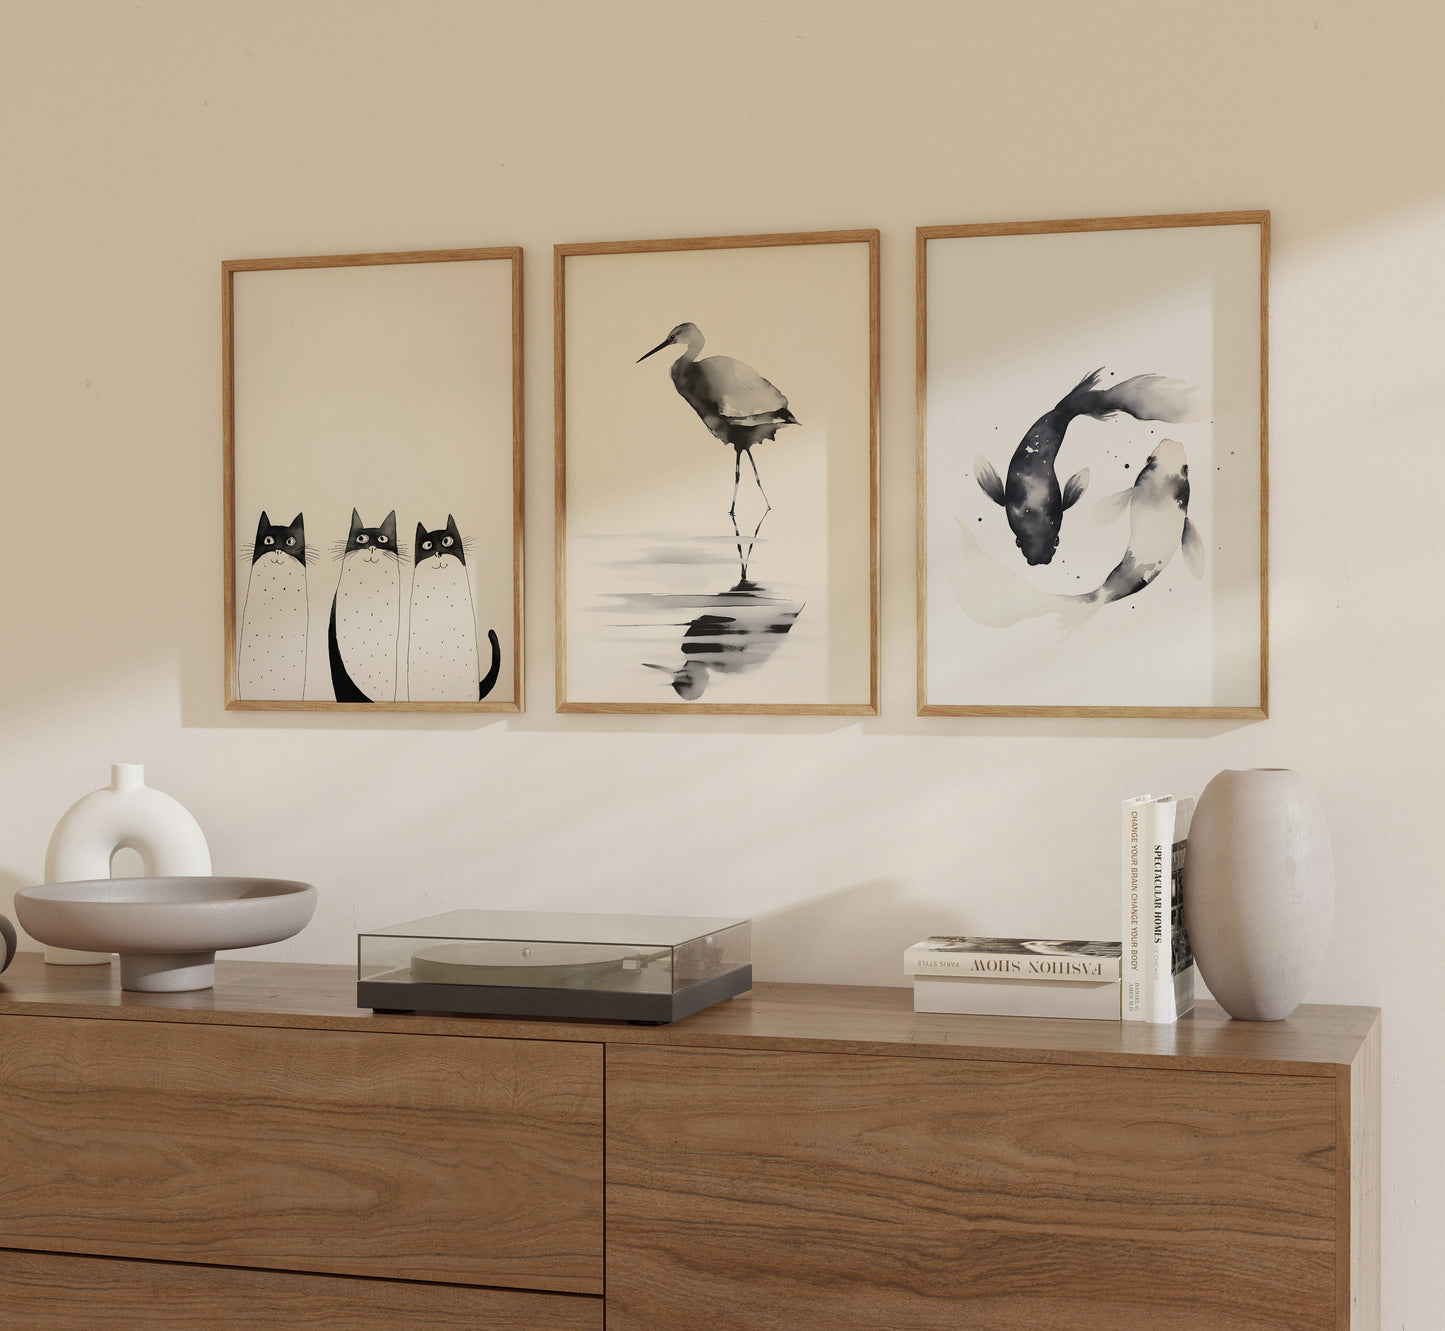 Three framed art pieces on a wall above a wooden sideboard with decorative objects.